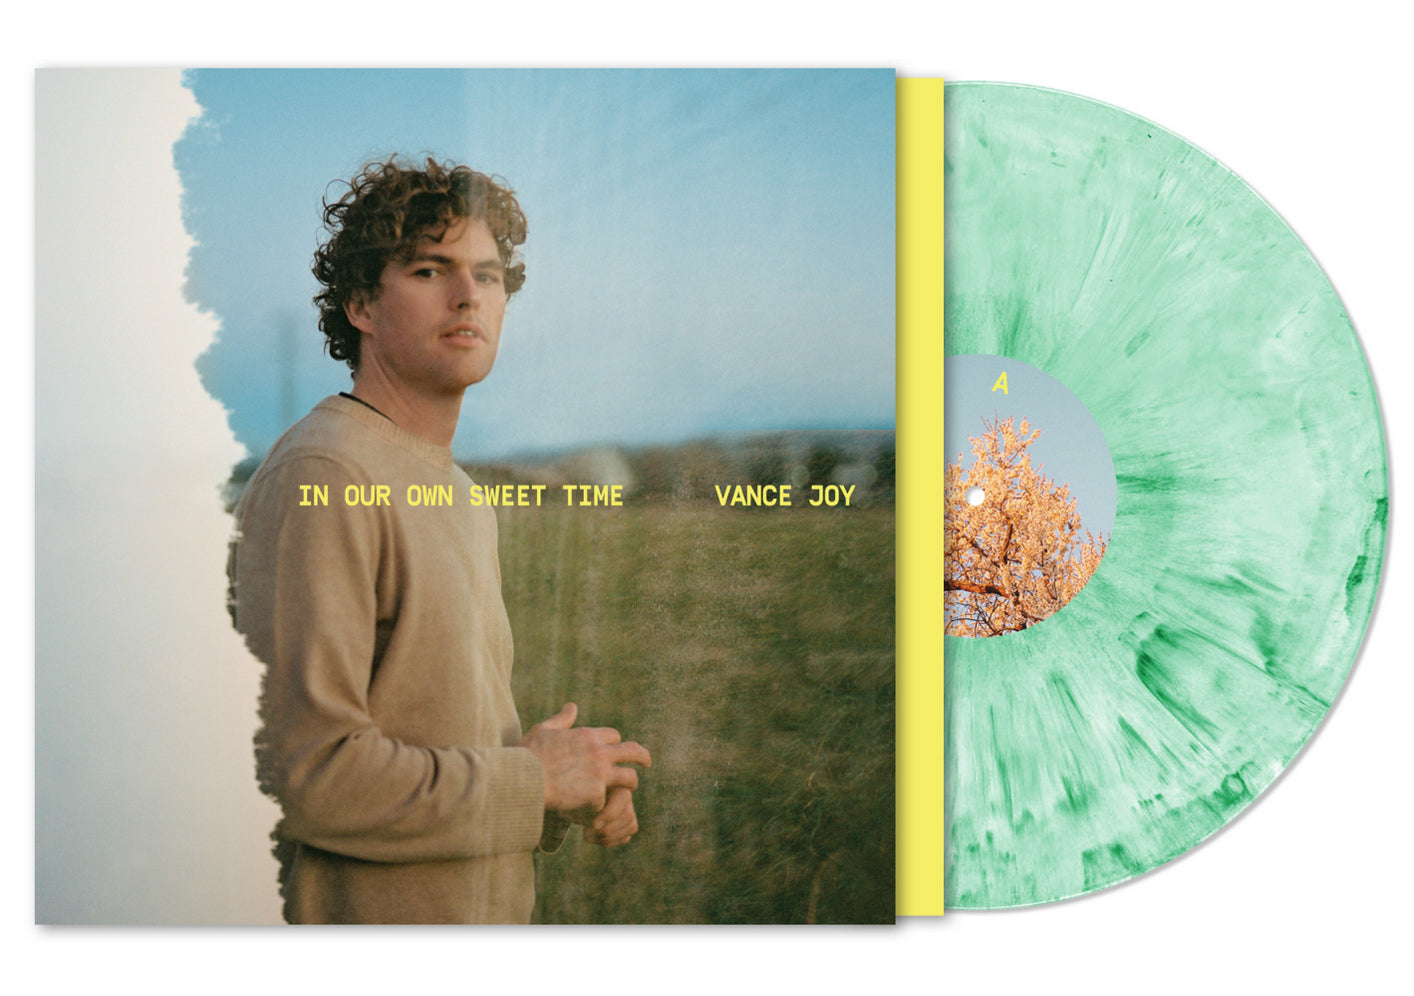 Vance Joy "In Our Own Sweet Time" Green and White Color Vinyl LP Record